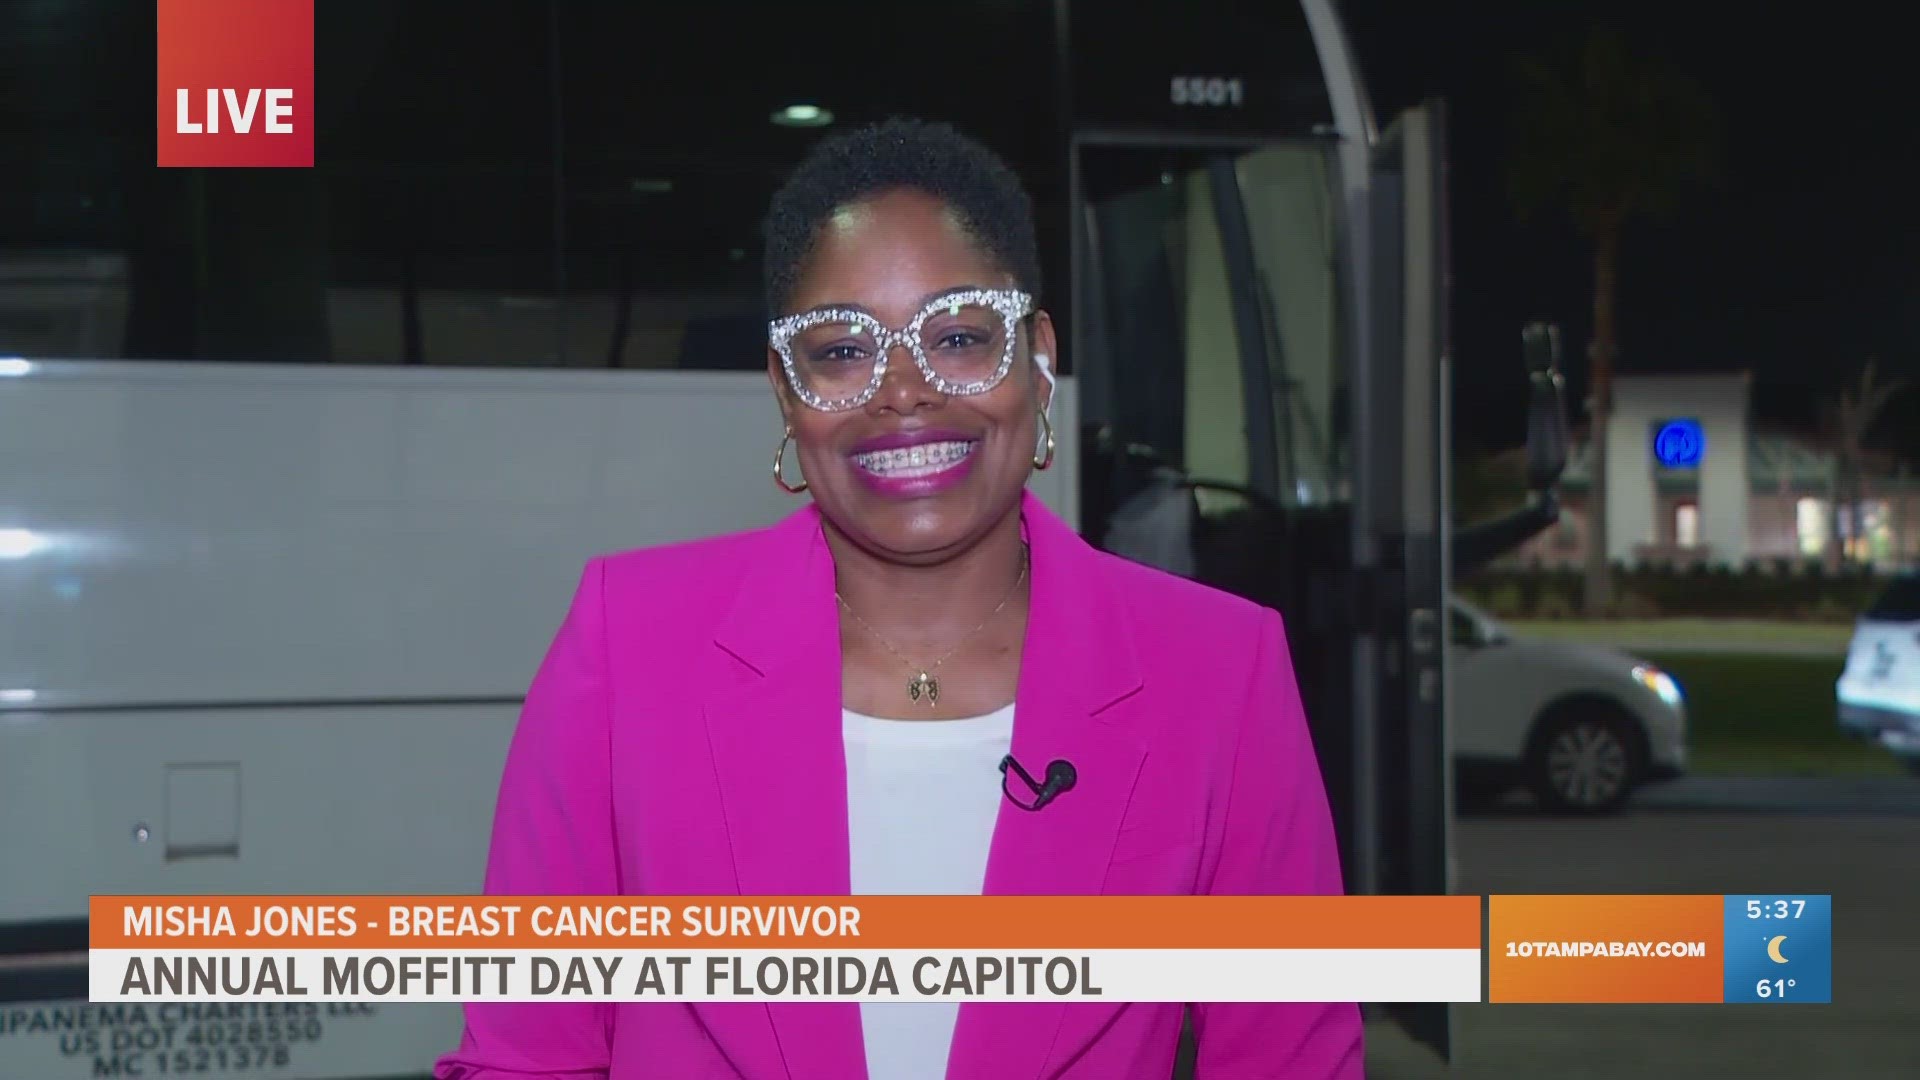 Misha Jones says she was diagnosed with breast cancer in 2020 when she was 38. Without the care from Moffitt Cancer Center, she says she's not sure where she'd be.